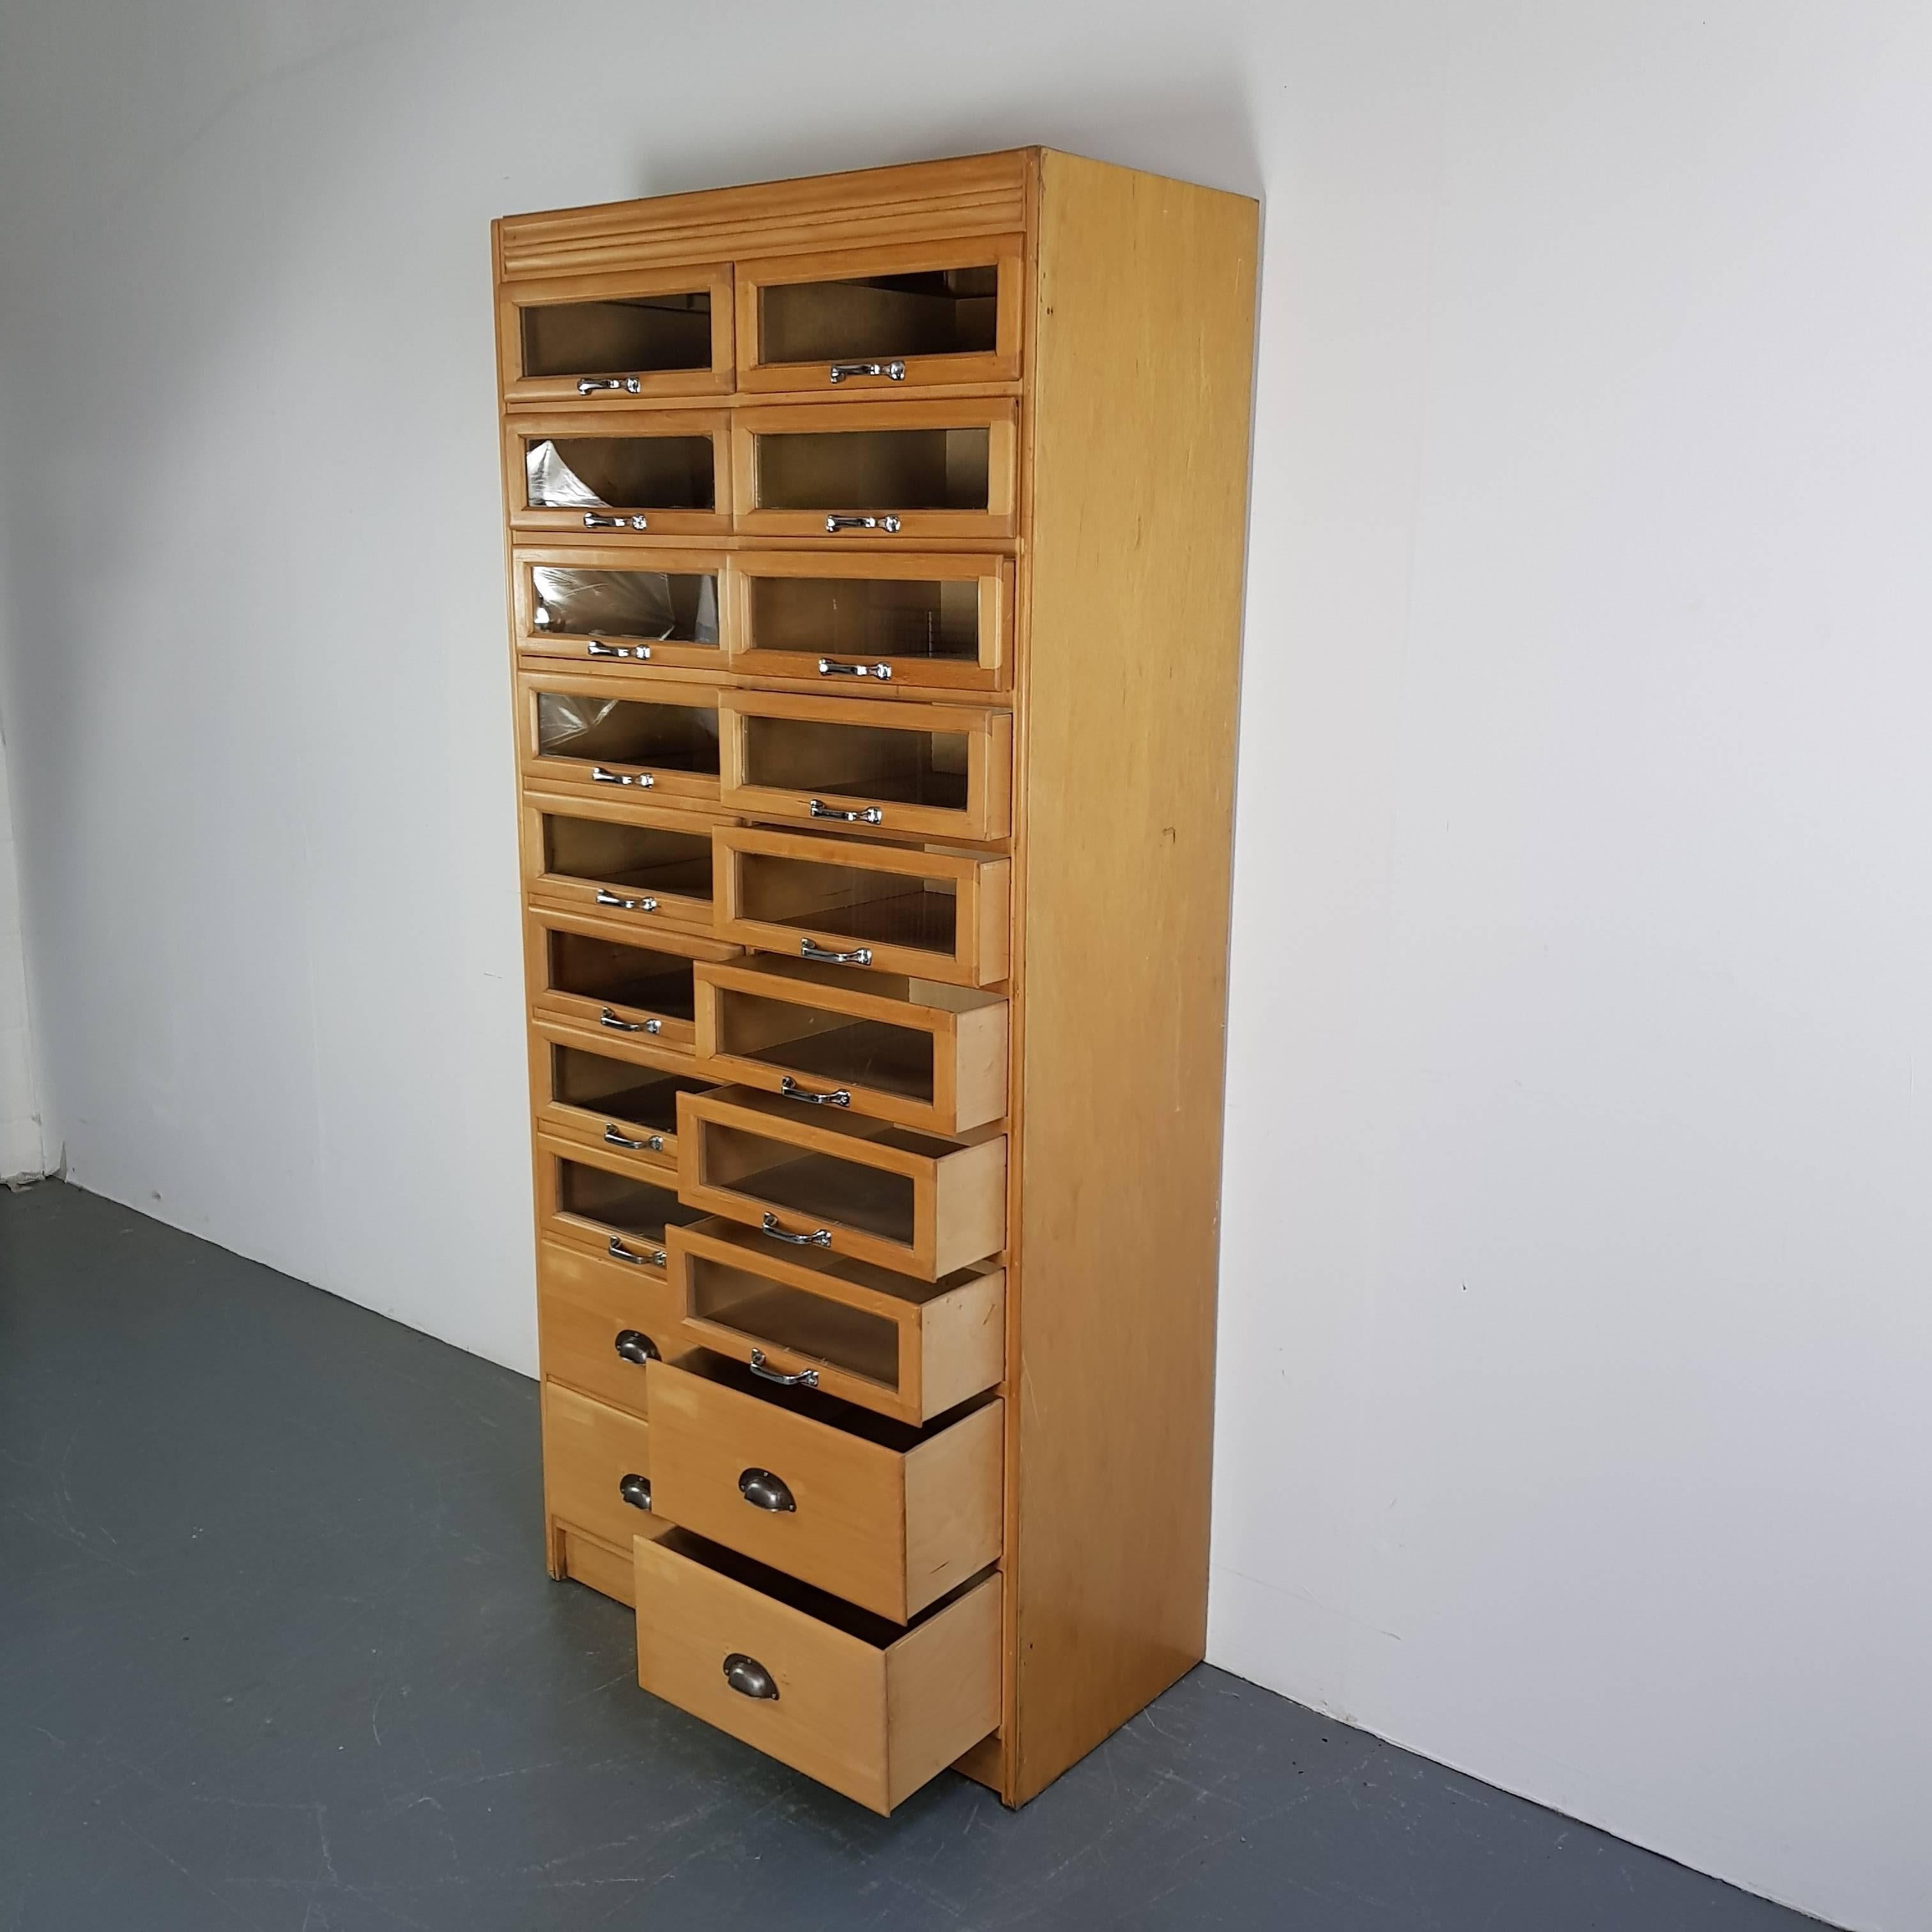 Vintage 20 Drawer Haberdashery Cabinet Shop Display In Good Condition For Sale In Lewes, East Sussex